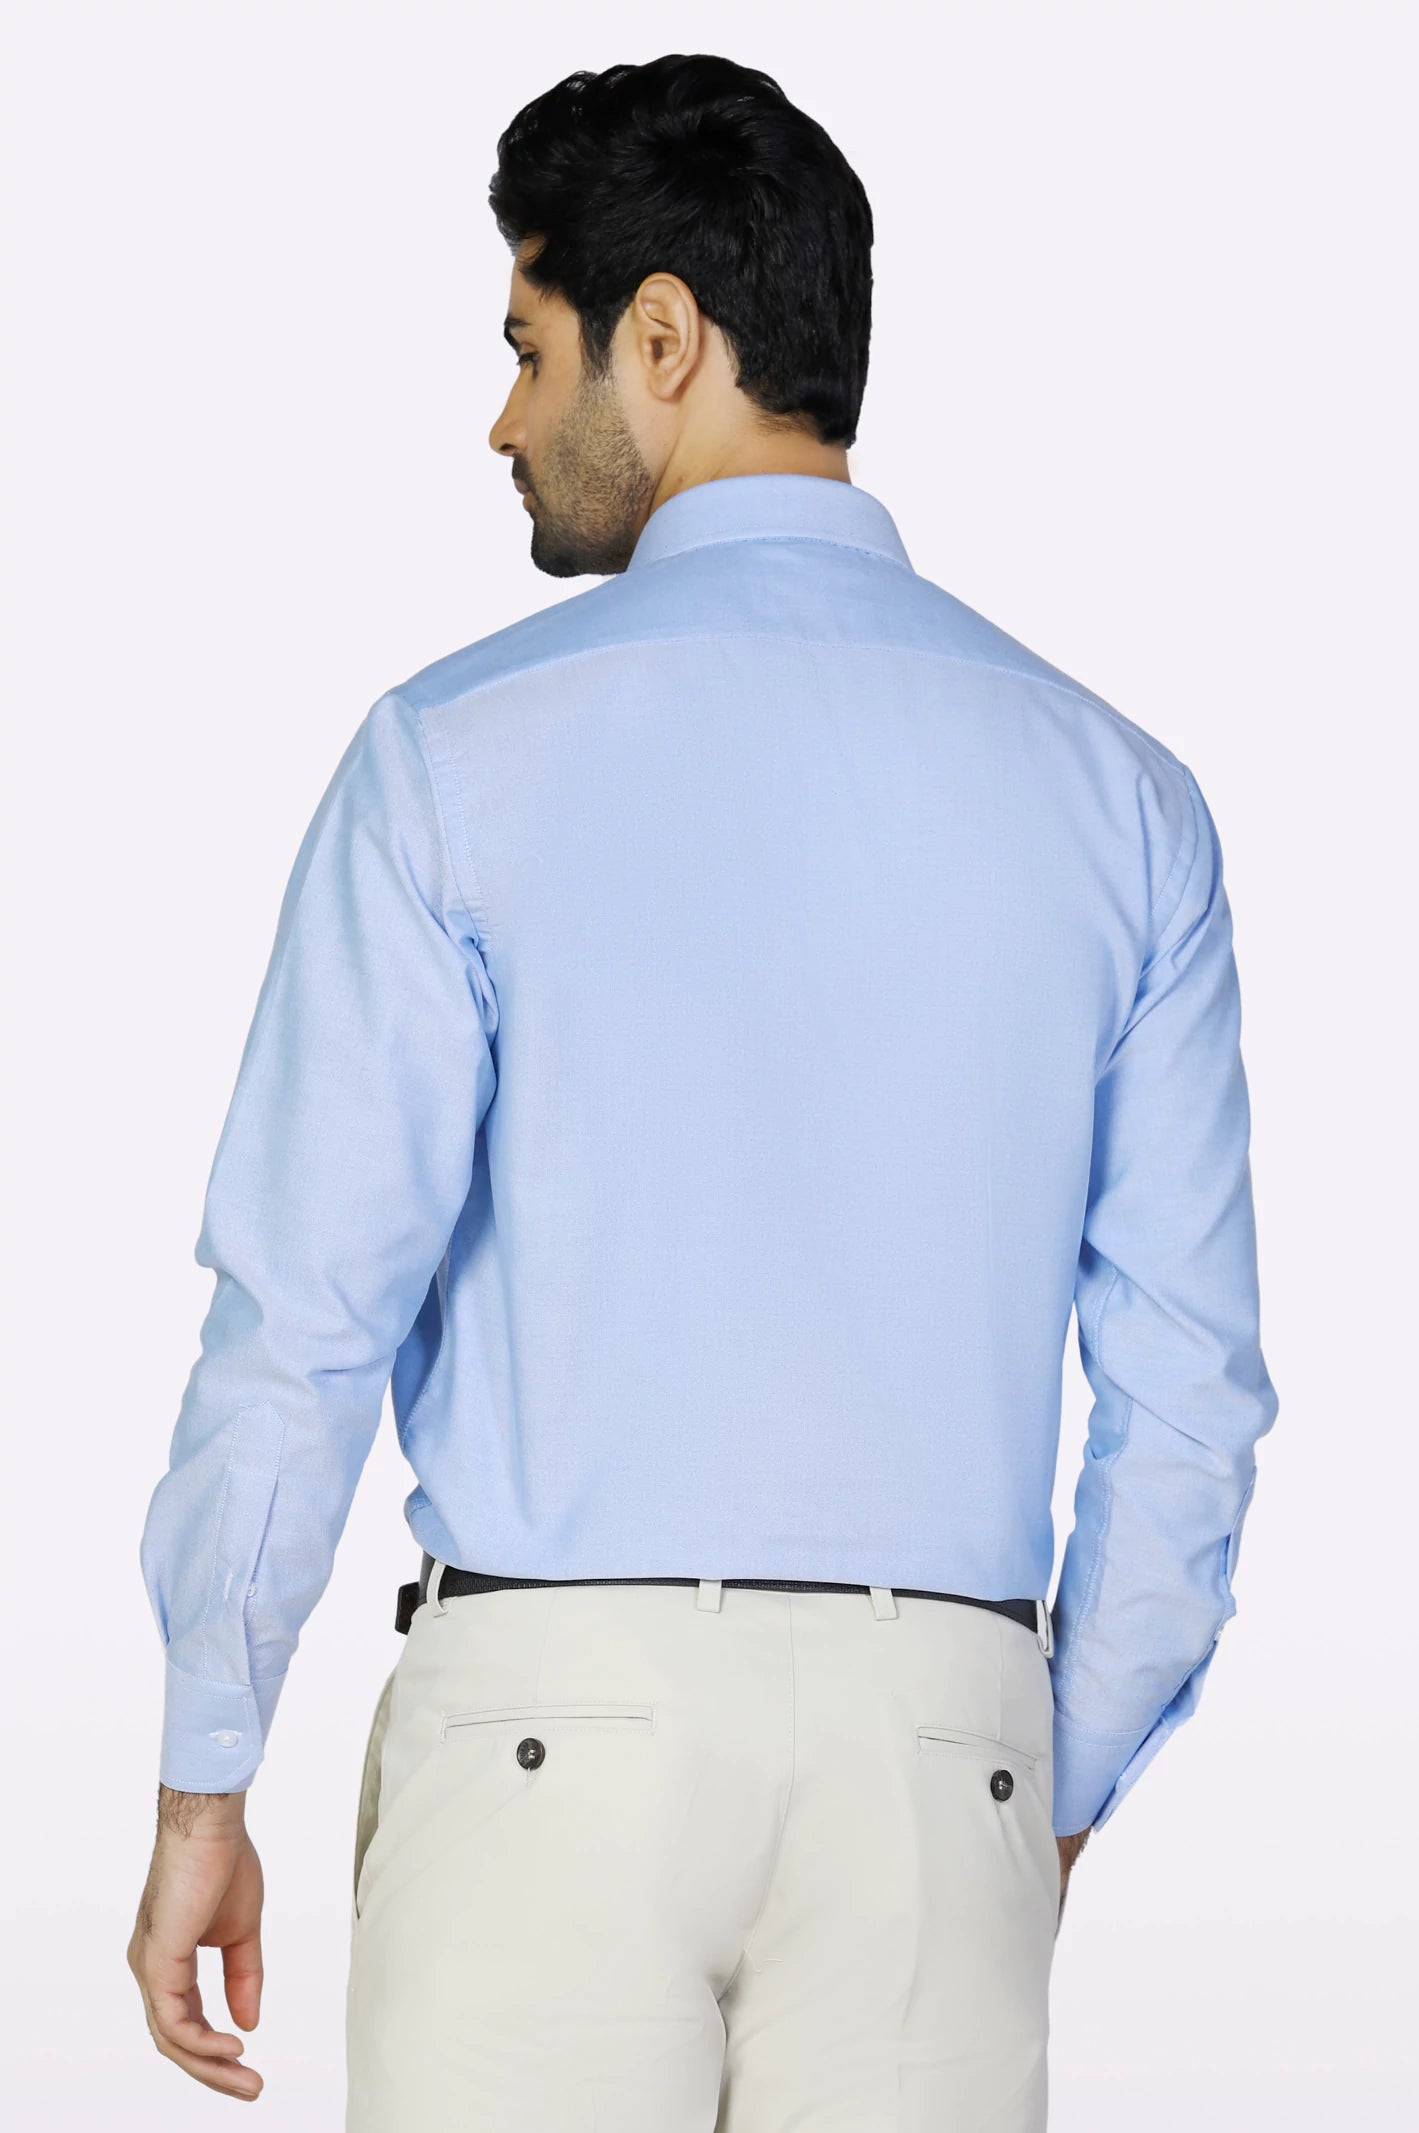 Sky Blue Plain Formal Shirt From Diners